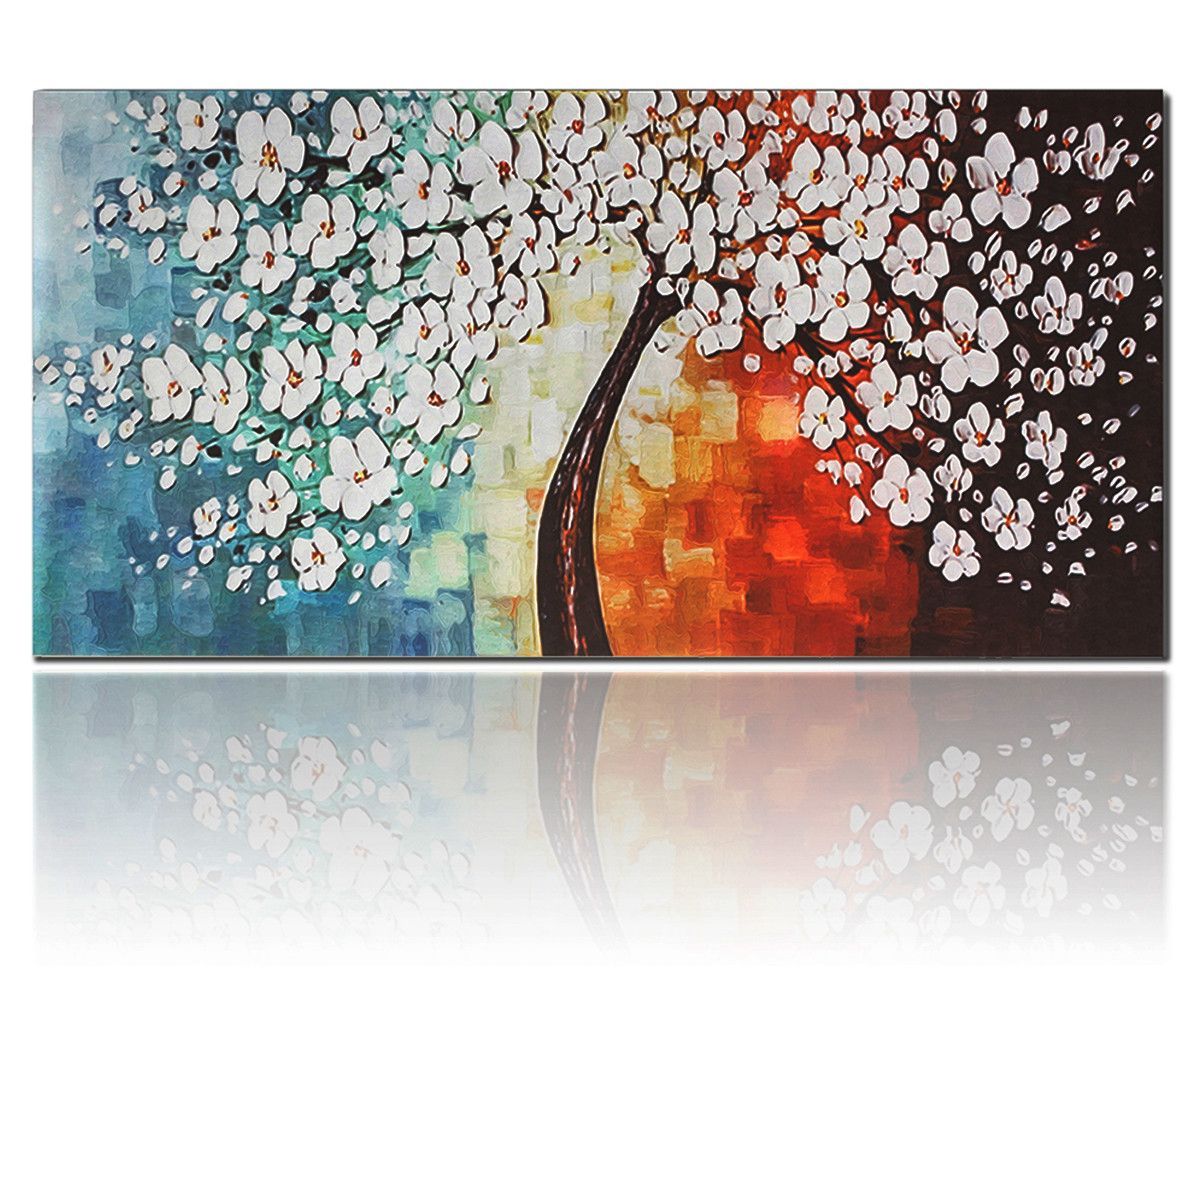 White-Plum-Flower-Tree-Oil-Paintings-Unframed-Canvas-Print-Wall-Art-Picture-Home-Decorations-1582919